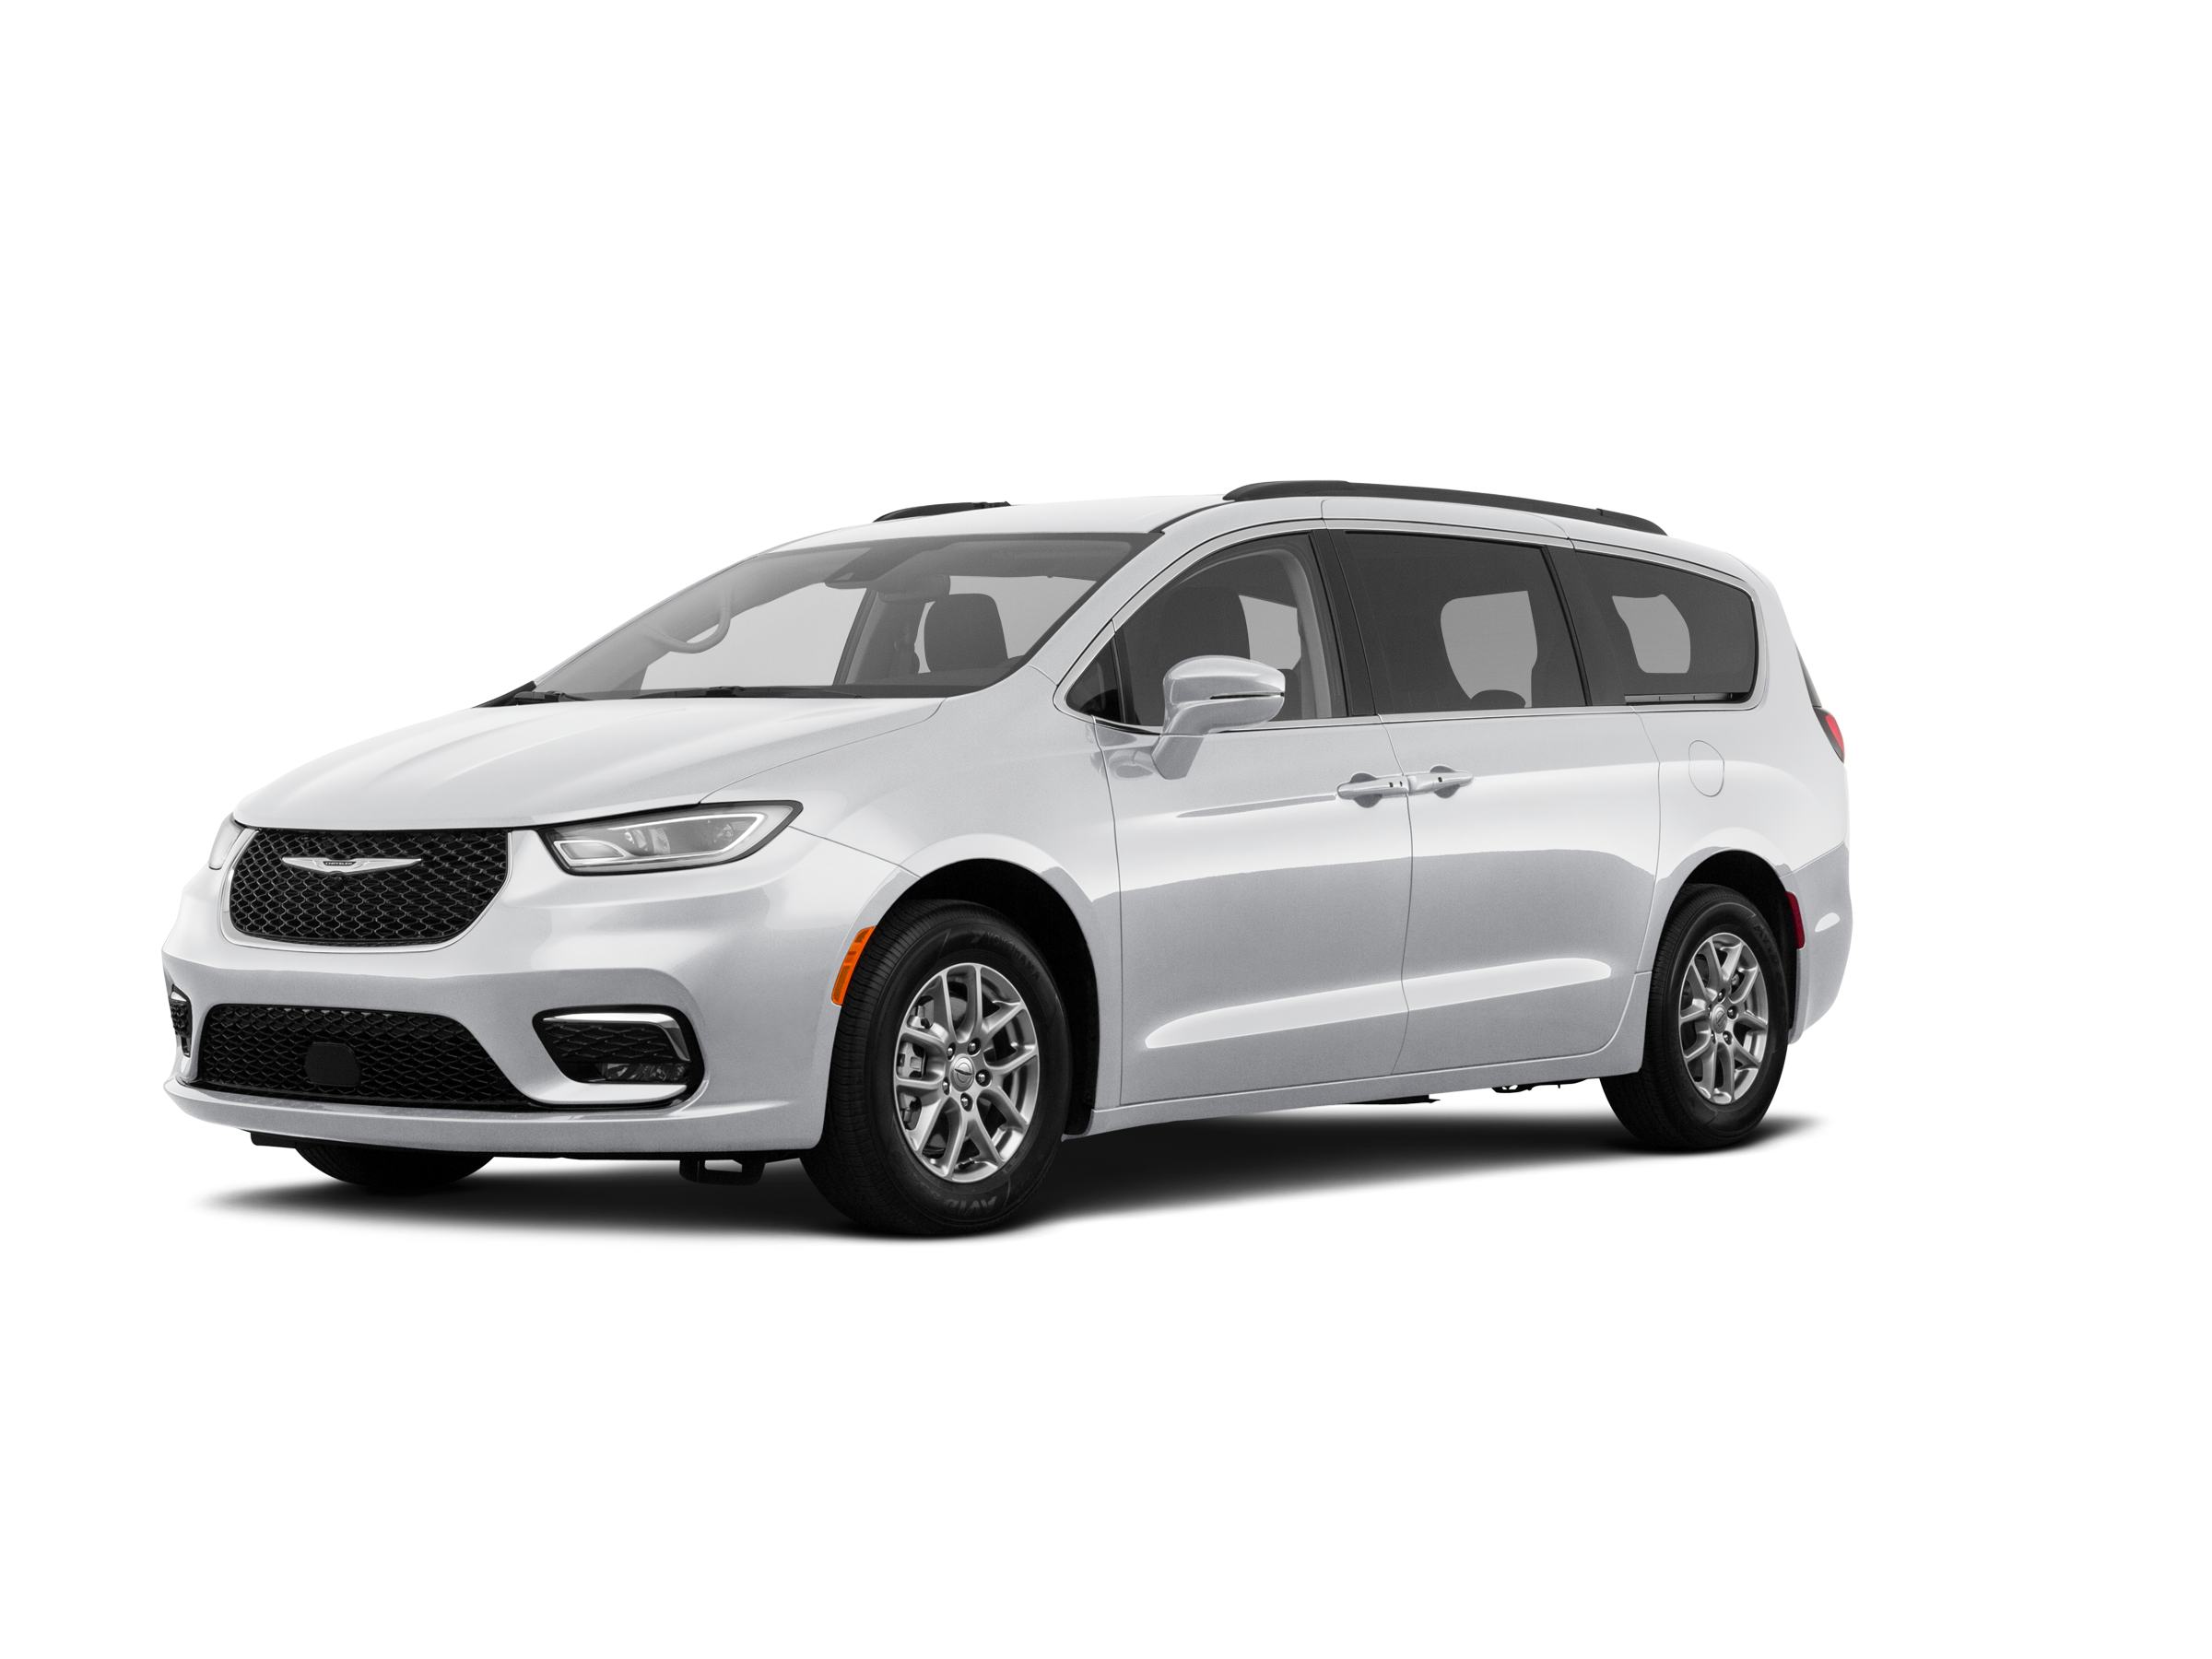 2020 Chrysler Pacifica Review, Pricing, and Specs